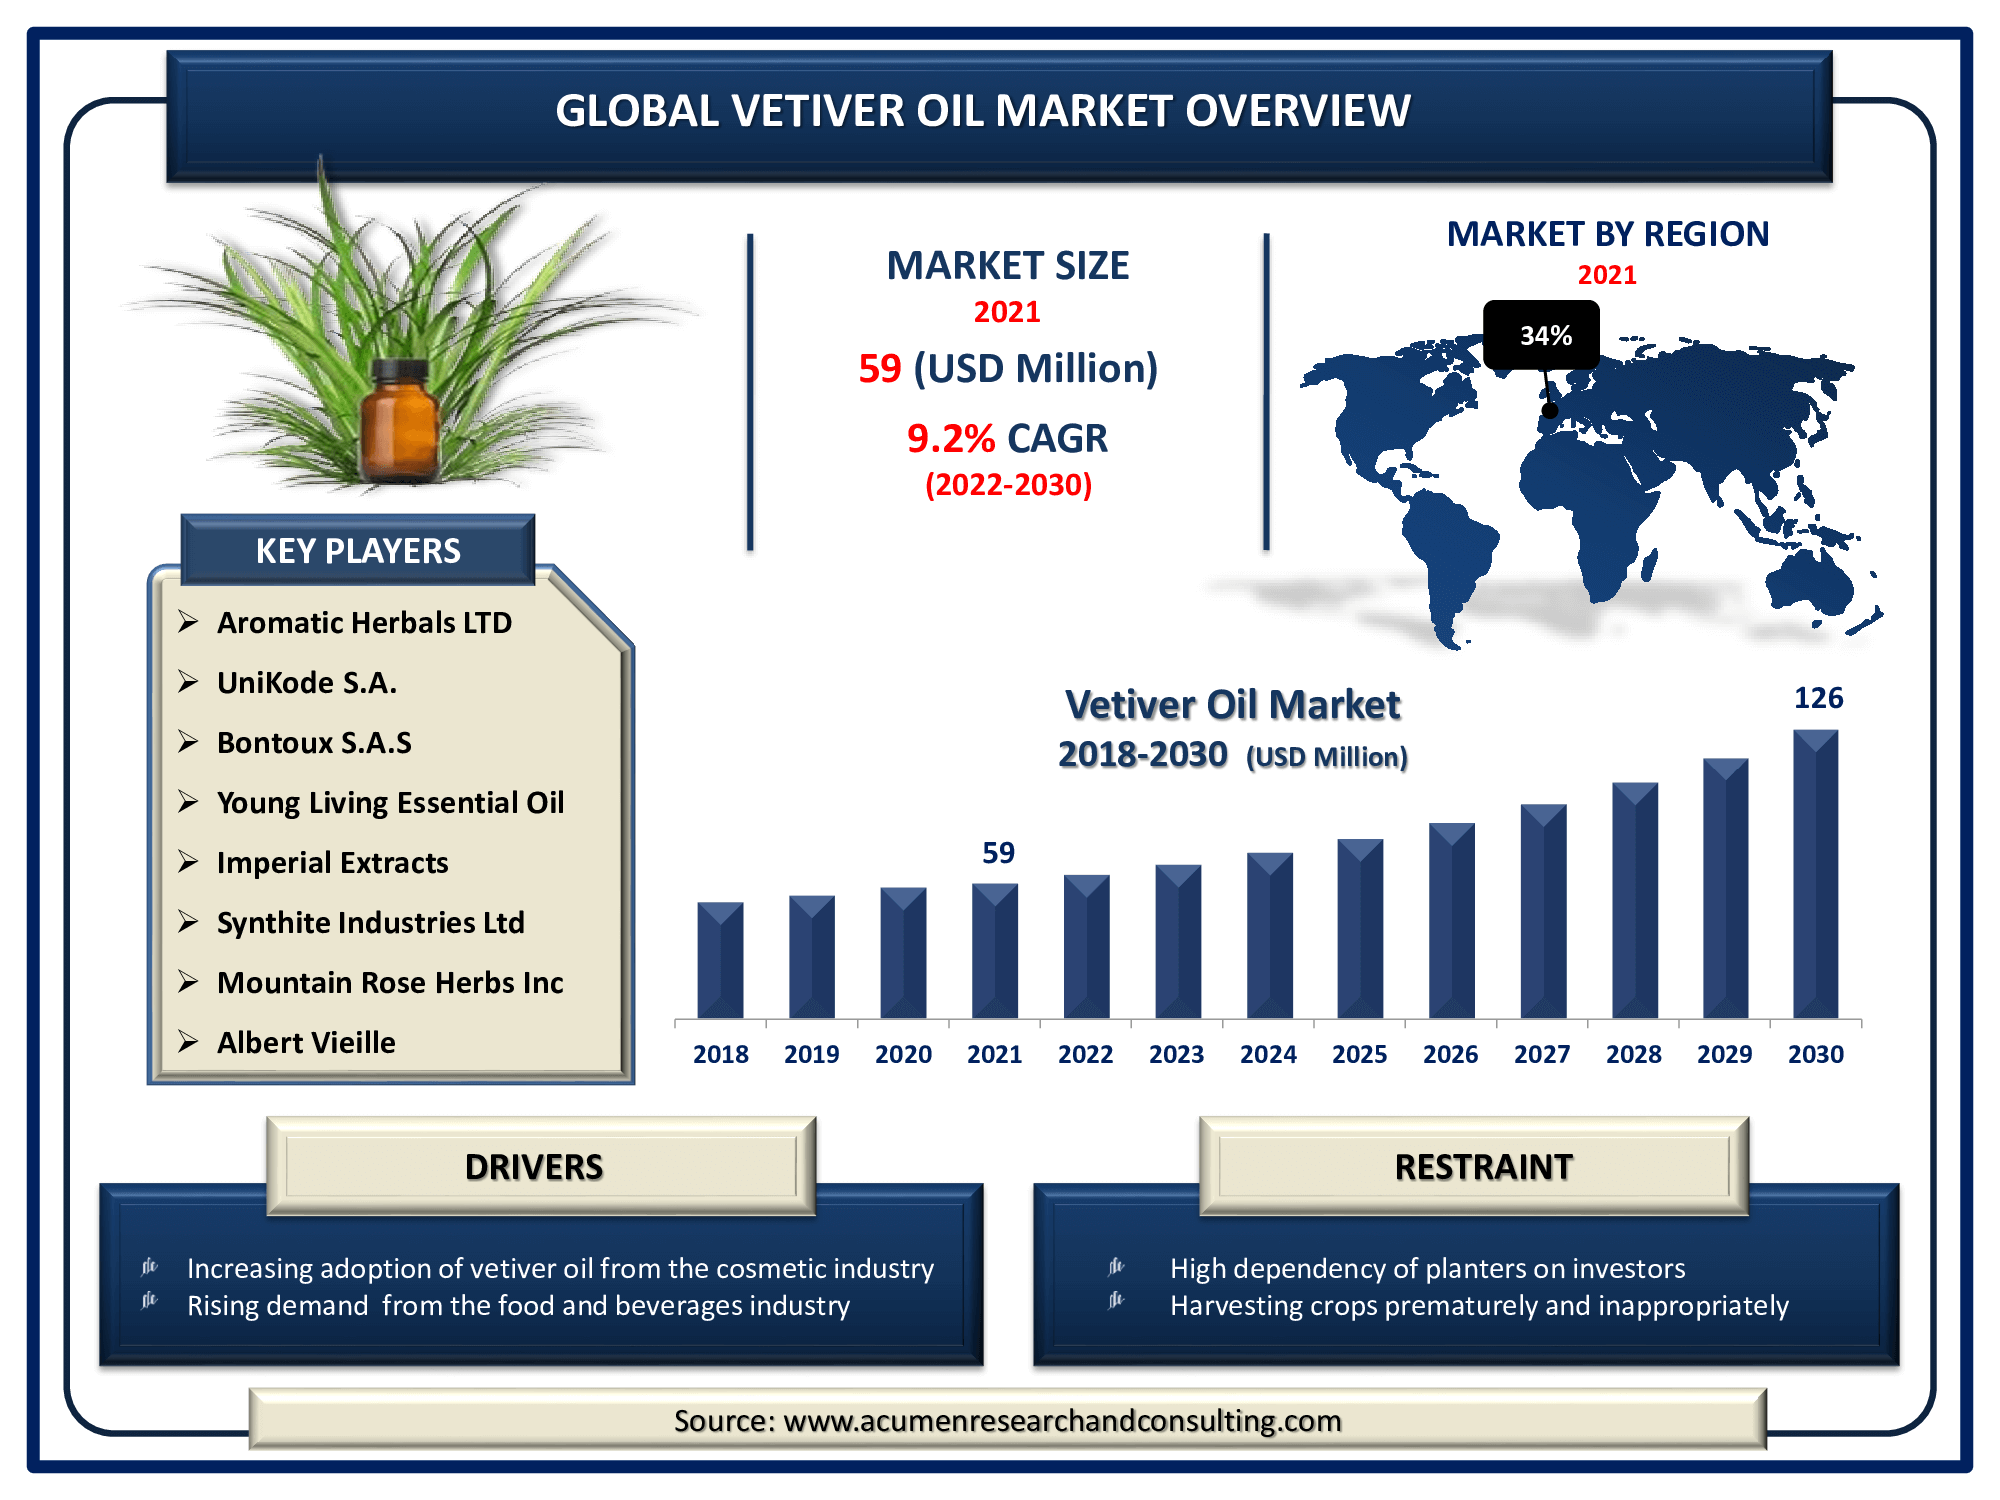 The Global Vetiver Oil Market Size accounted for a revenue of USD 59 Million in 2021 and is expected to reach the market value of USD 126 Million by 2030 growing at a significant CAGR of 9.2% during the forecast period from 2022 to 2030.